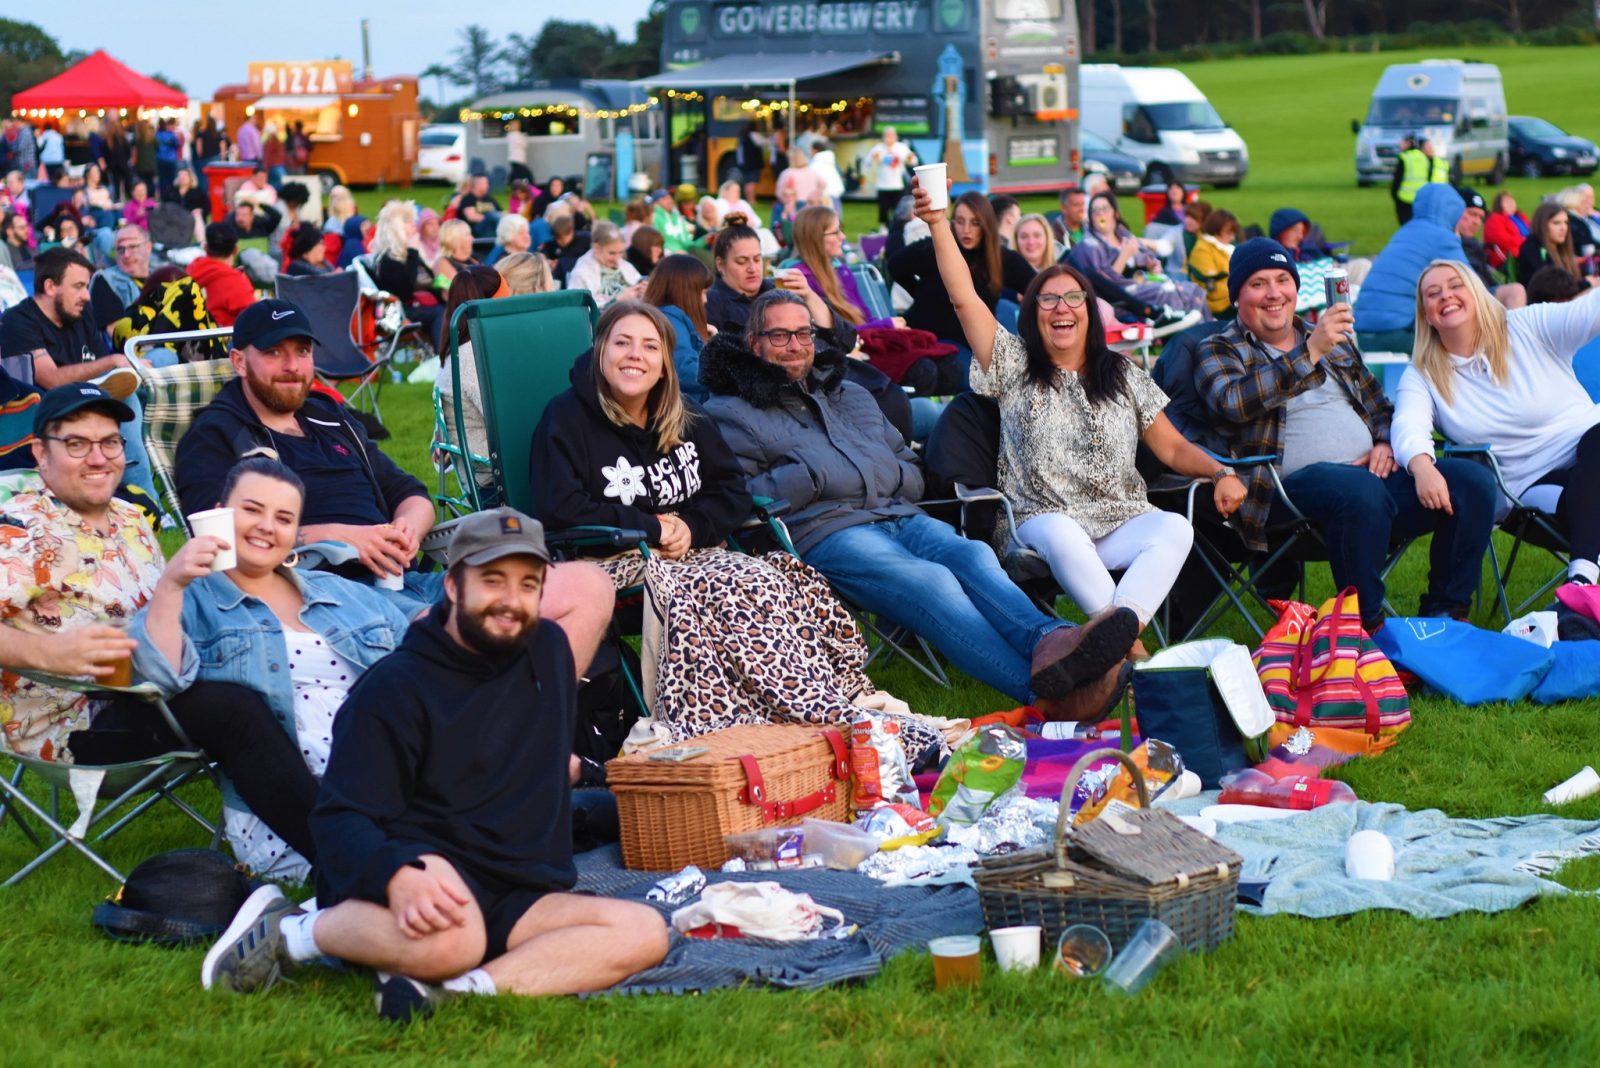 A group of people watching a film at an open-air cinema.